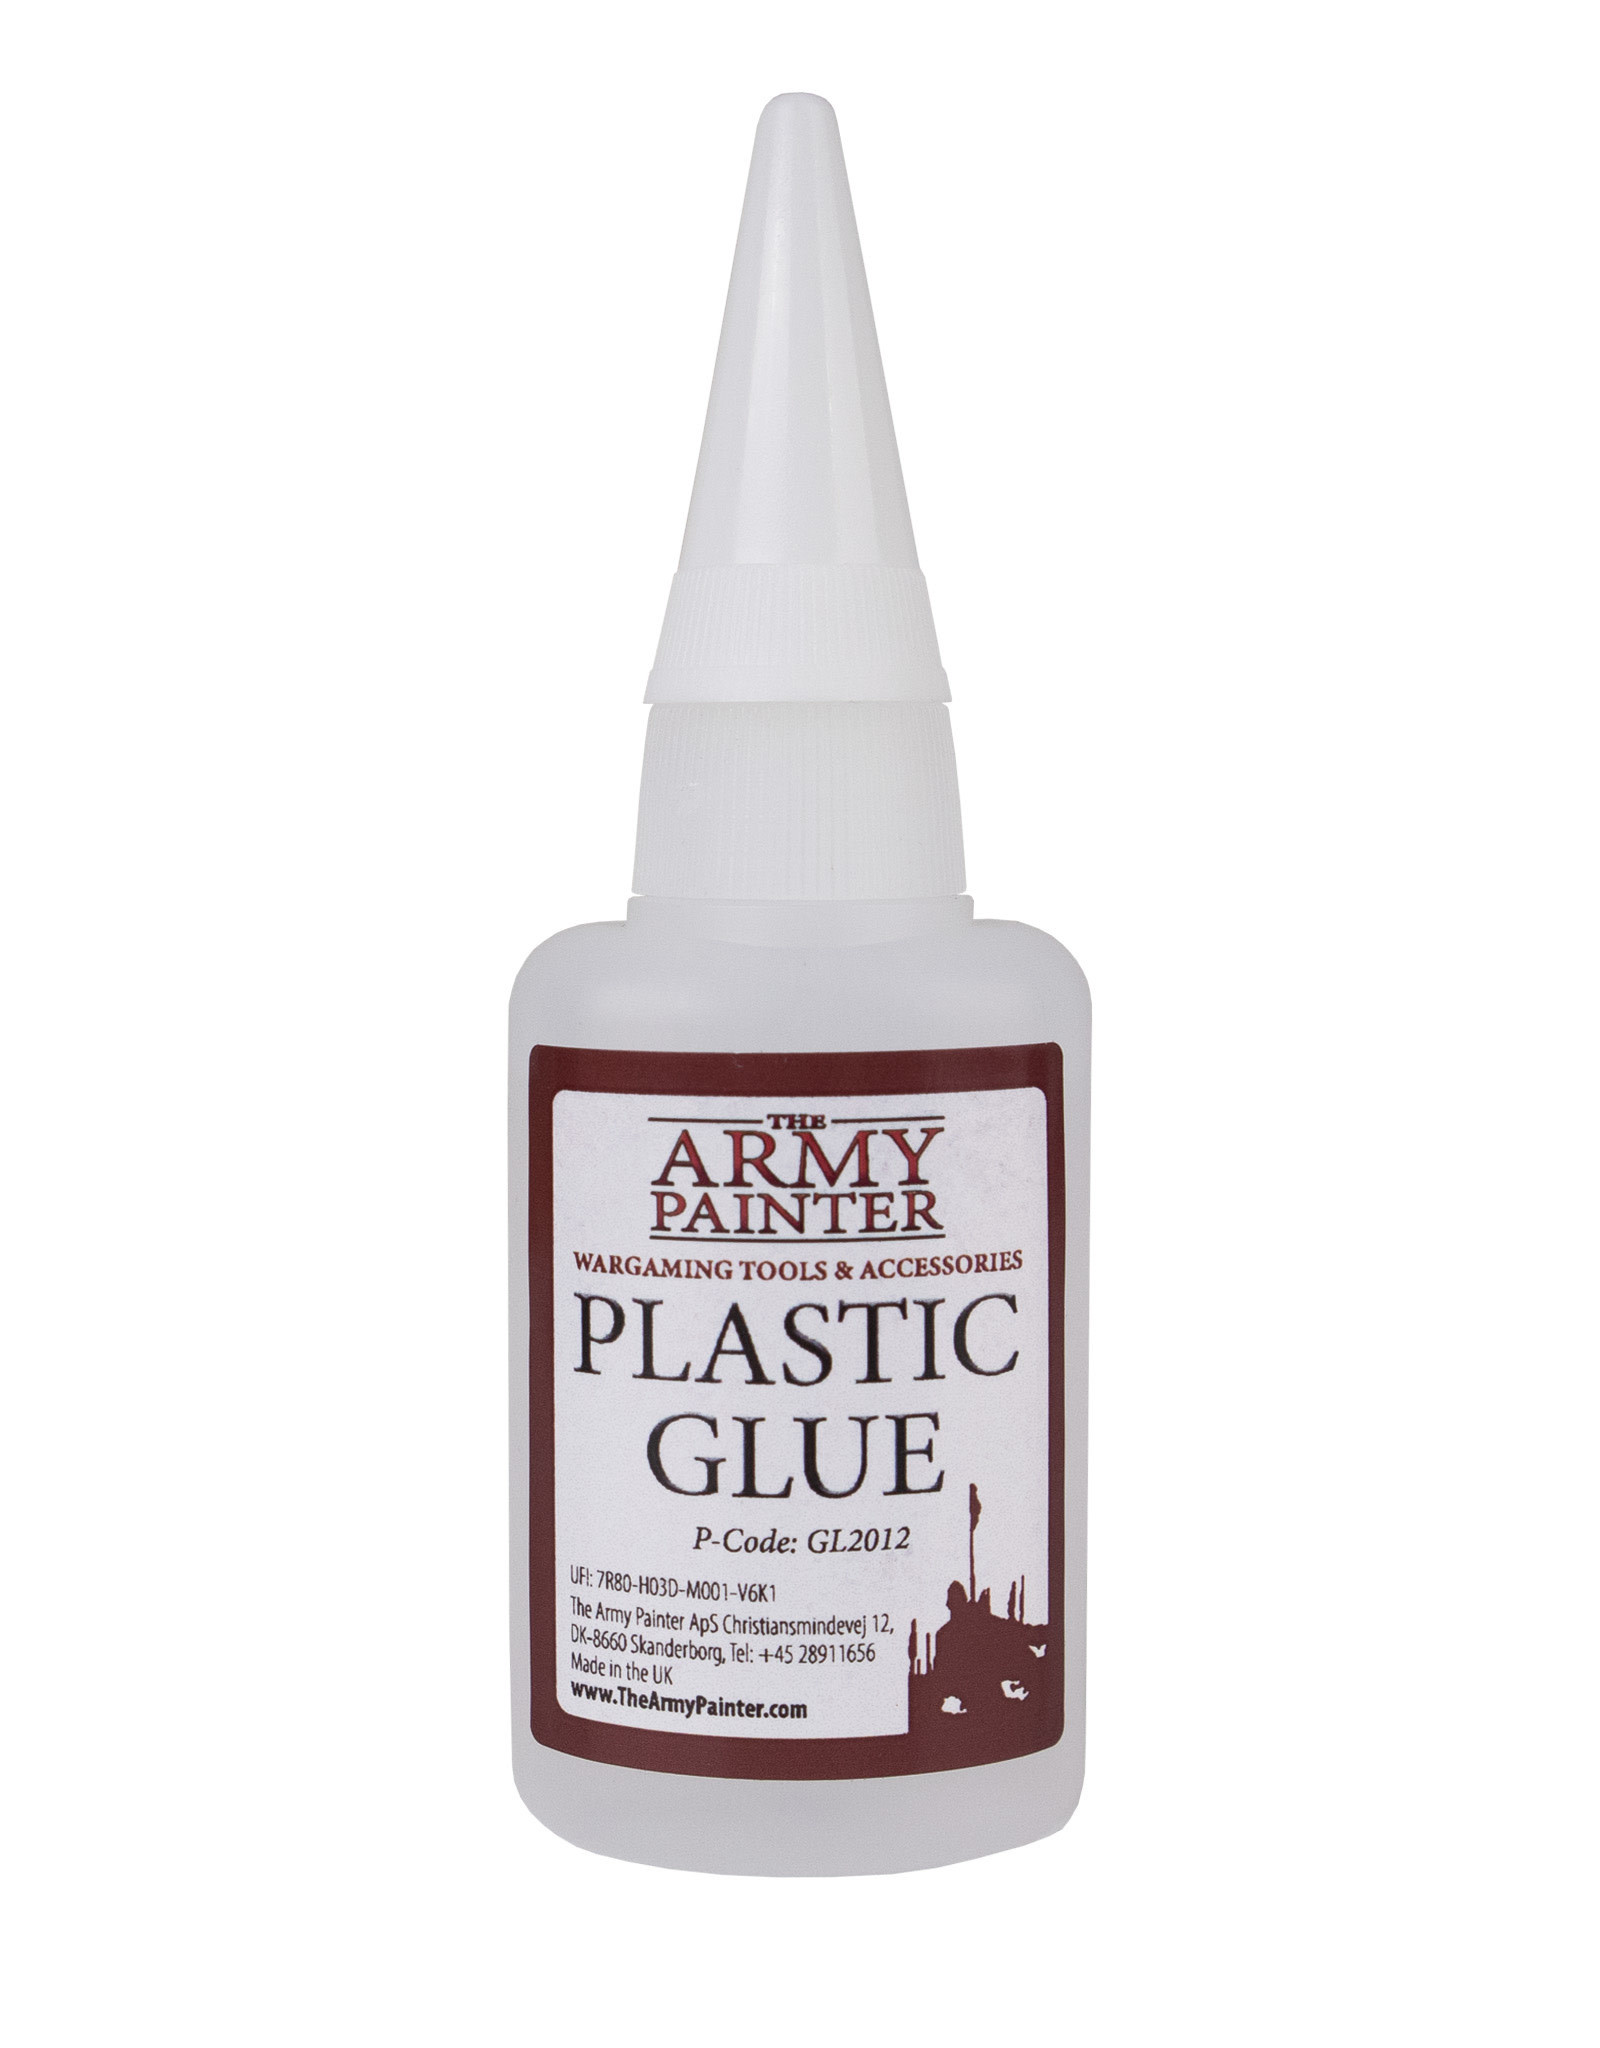 The Army Painter The Army Painter Plastic Glue